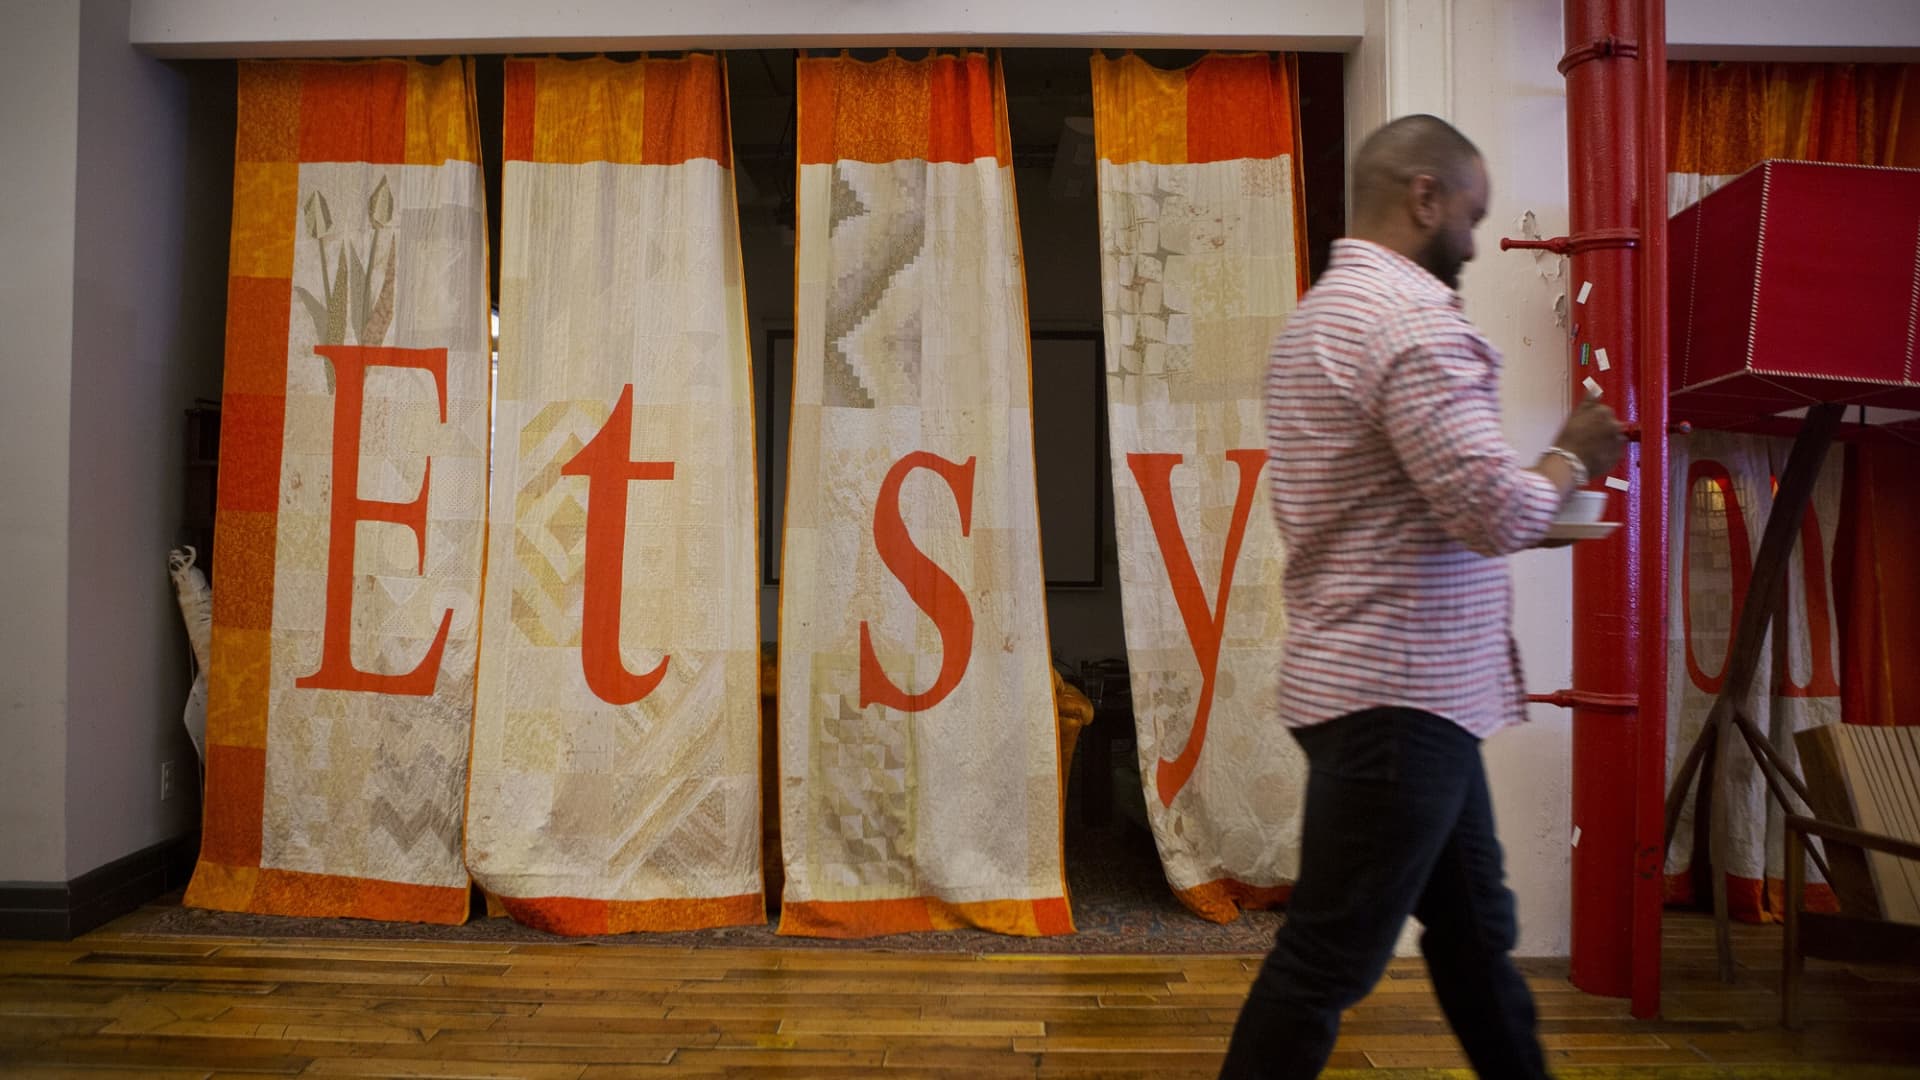 Etsy shares will remain under pressure even after 60% pullback this year, Needham says